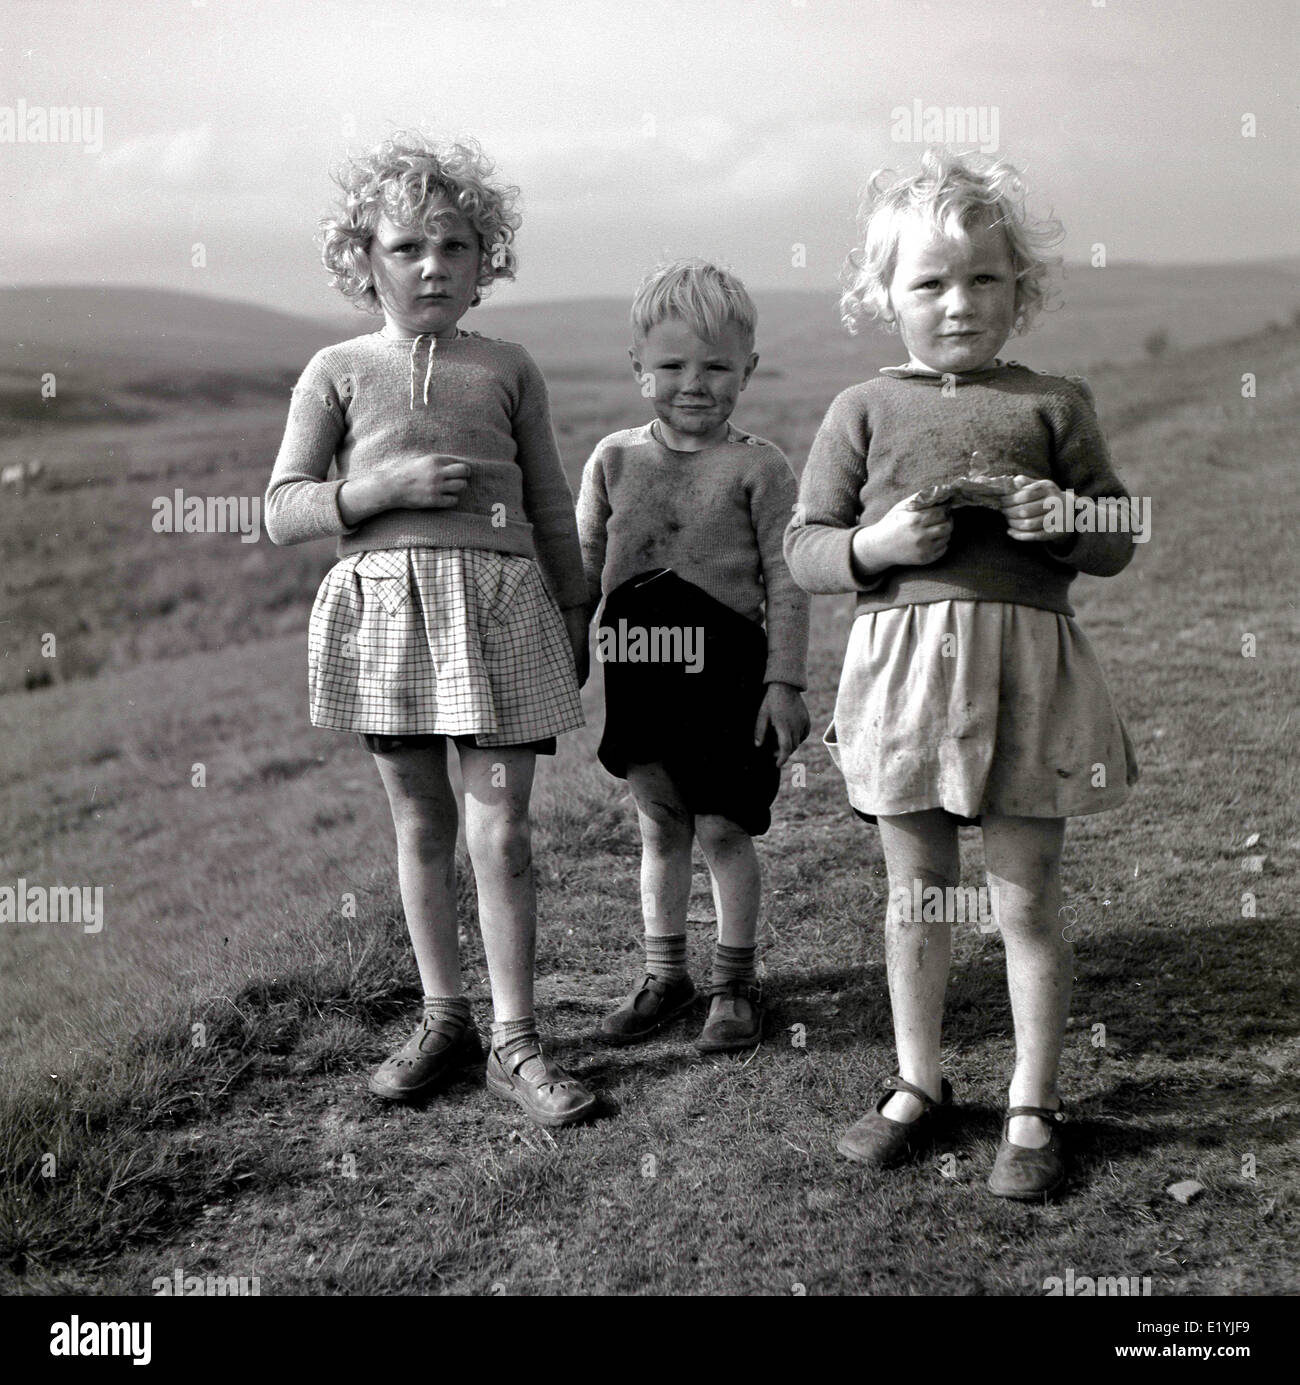 1950s historical portrait by J Allan Cash of three young country children standing together on a grassy hill. Stock Photo